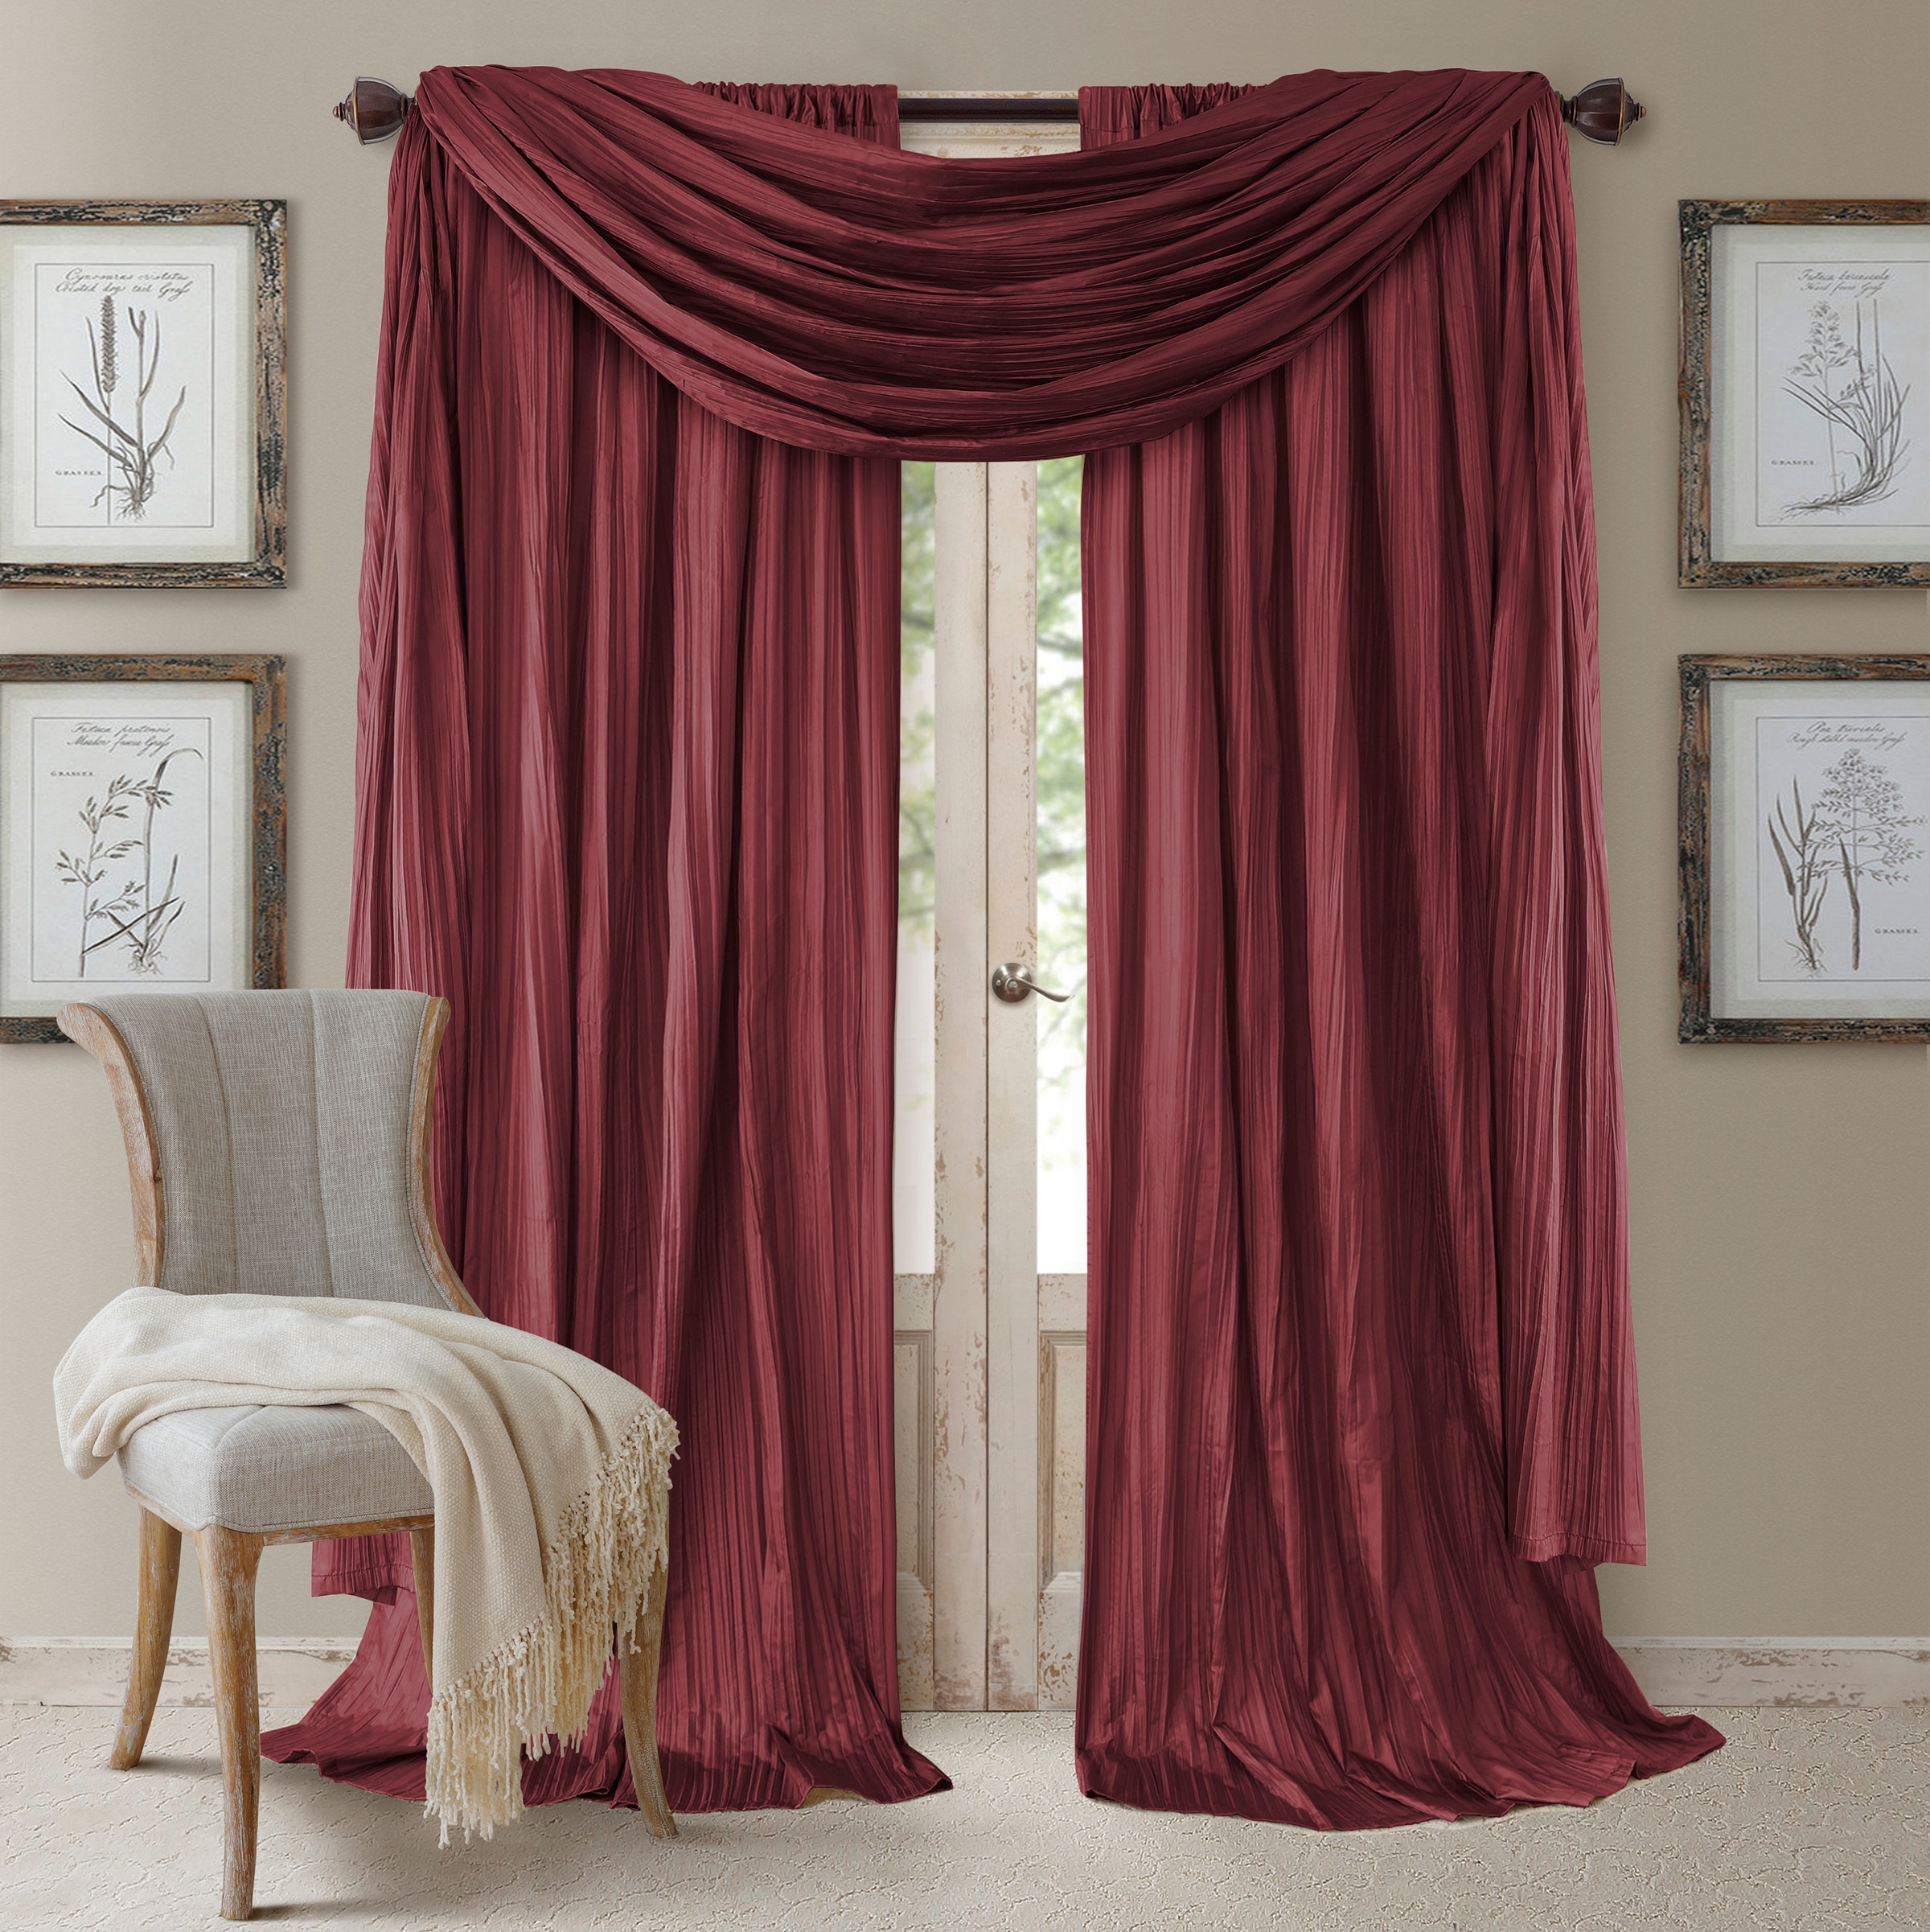 Elrene Antique Gold Faux Silk Rod Pocket Blackout Curtain - 52 in